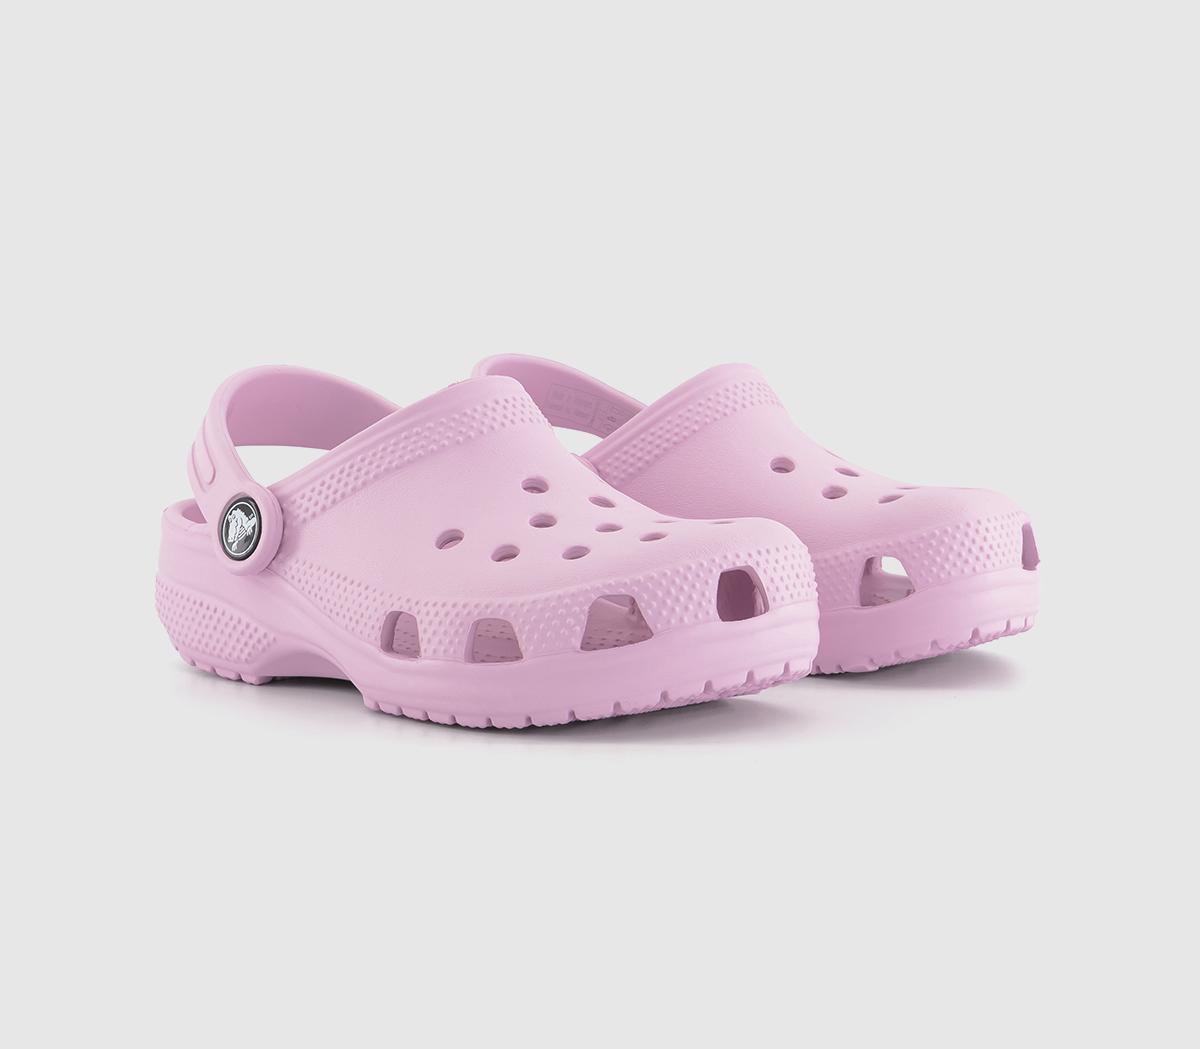 Crocs Classic Kids Clogs Ballerina Pink Synthetic, 1 Youth